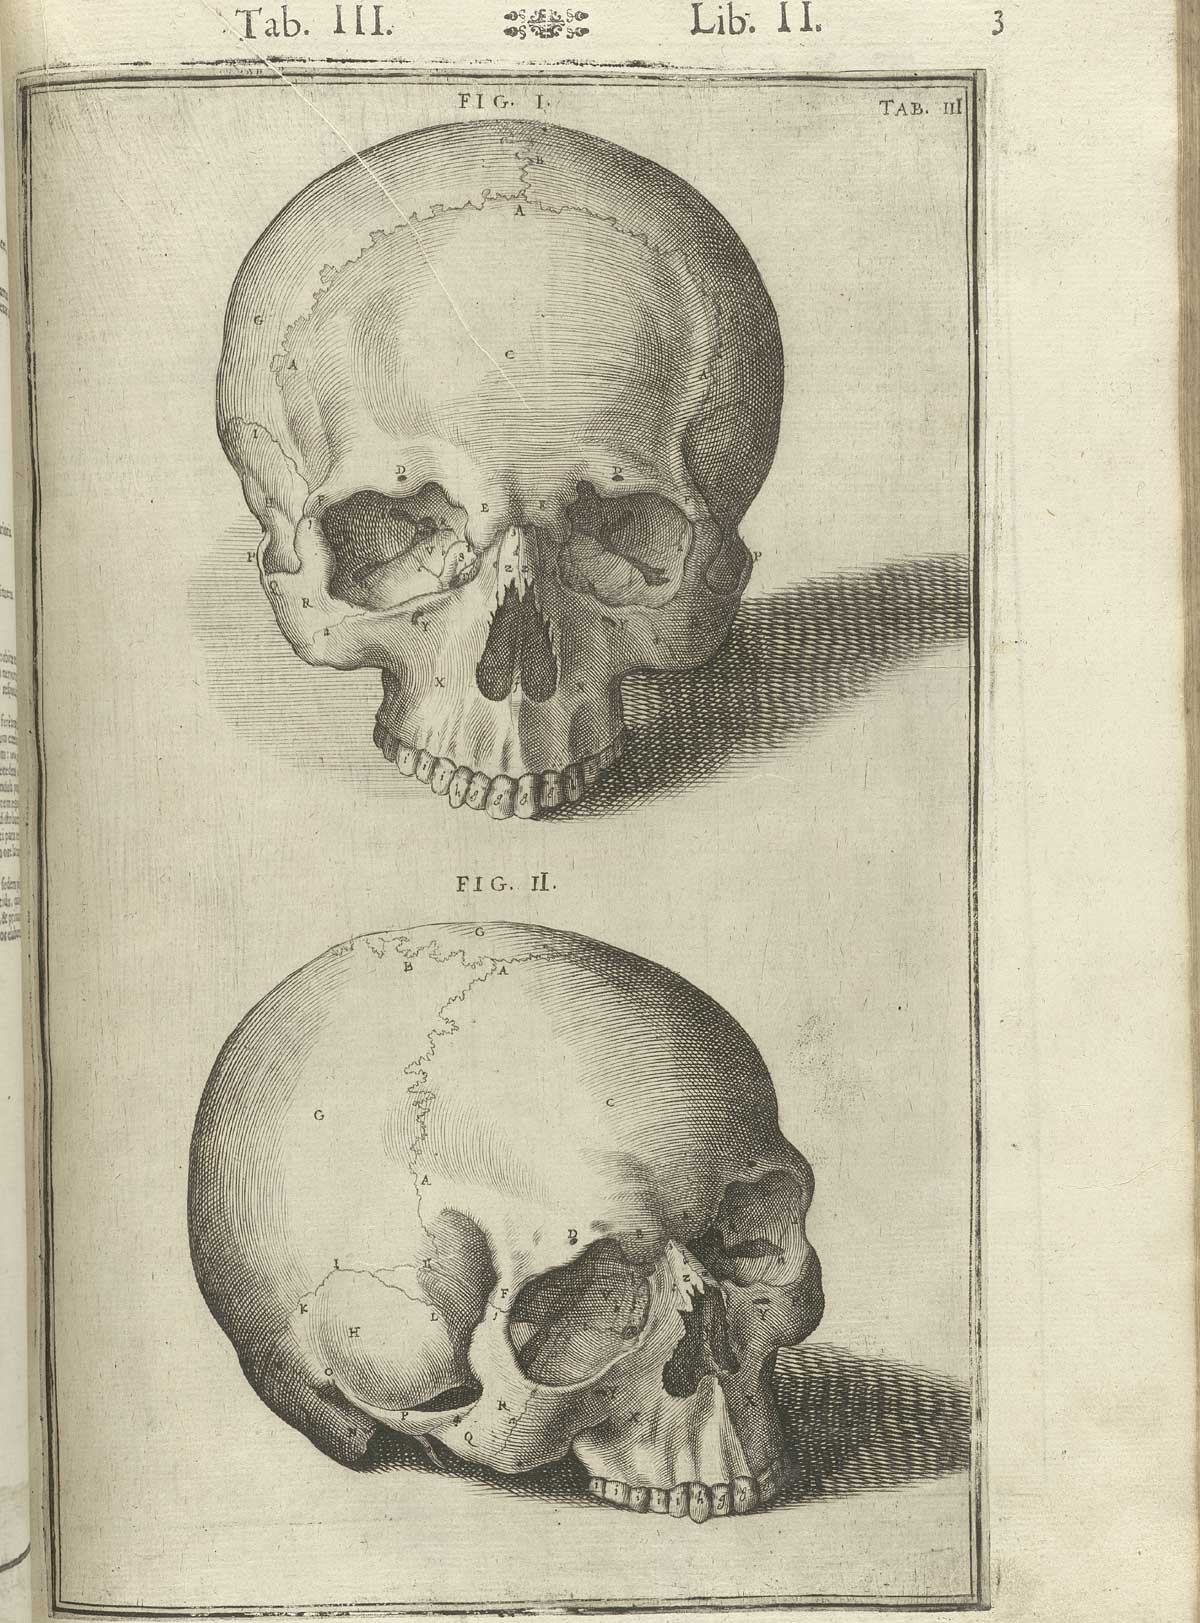 Engraving of two skulls lacking mandibles, the top facing directly at the viewer and the bottom one facing off to the right